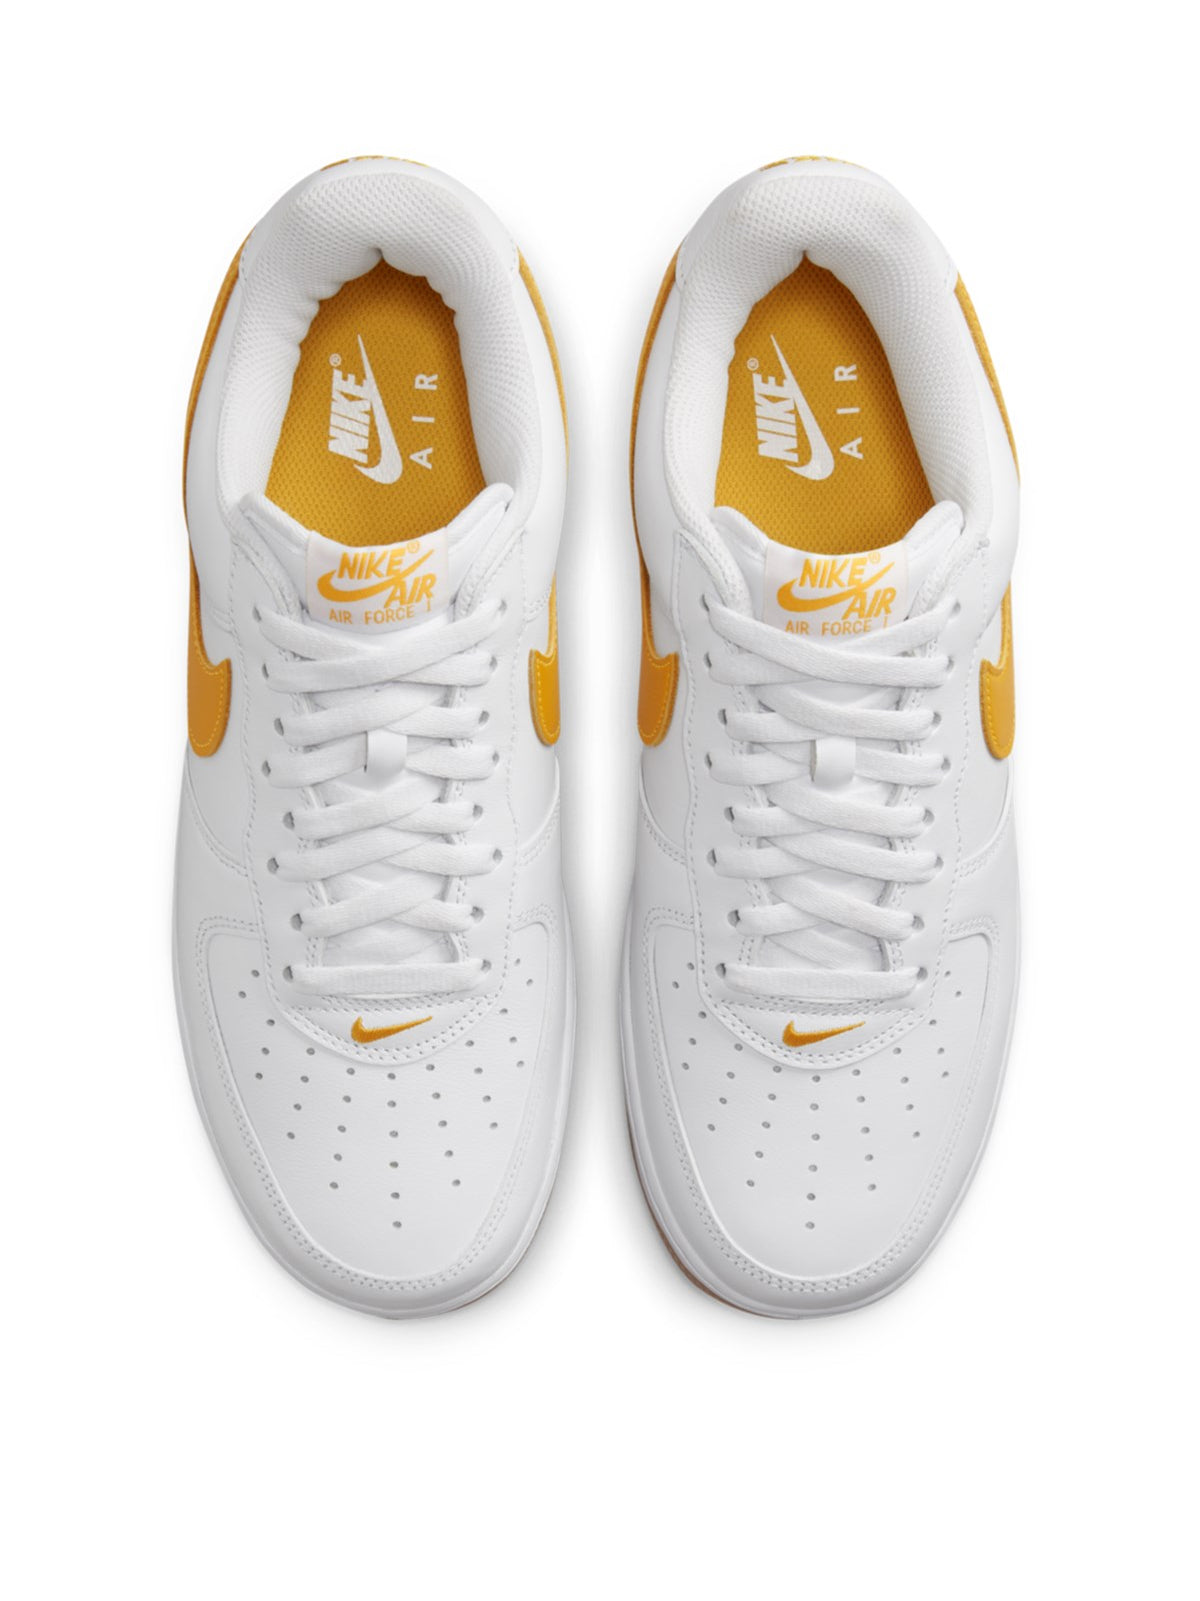 Air Force 1 Low Retro QS Sneakers